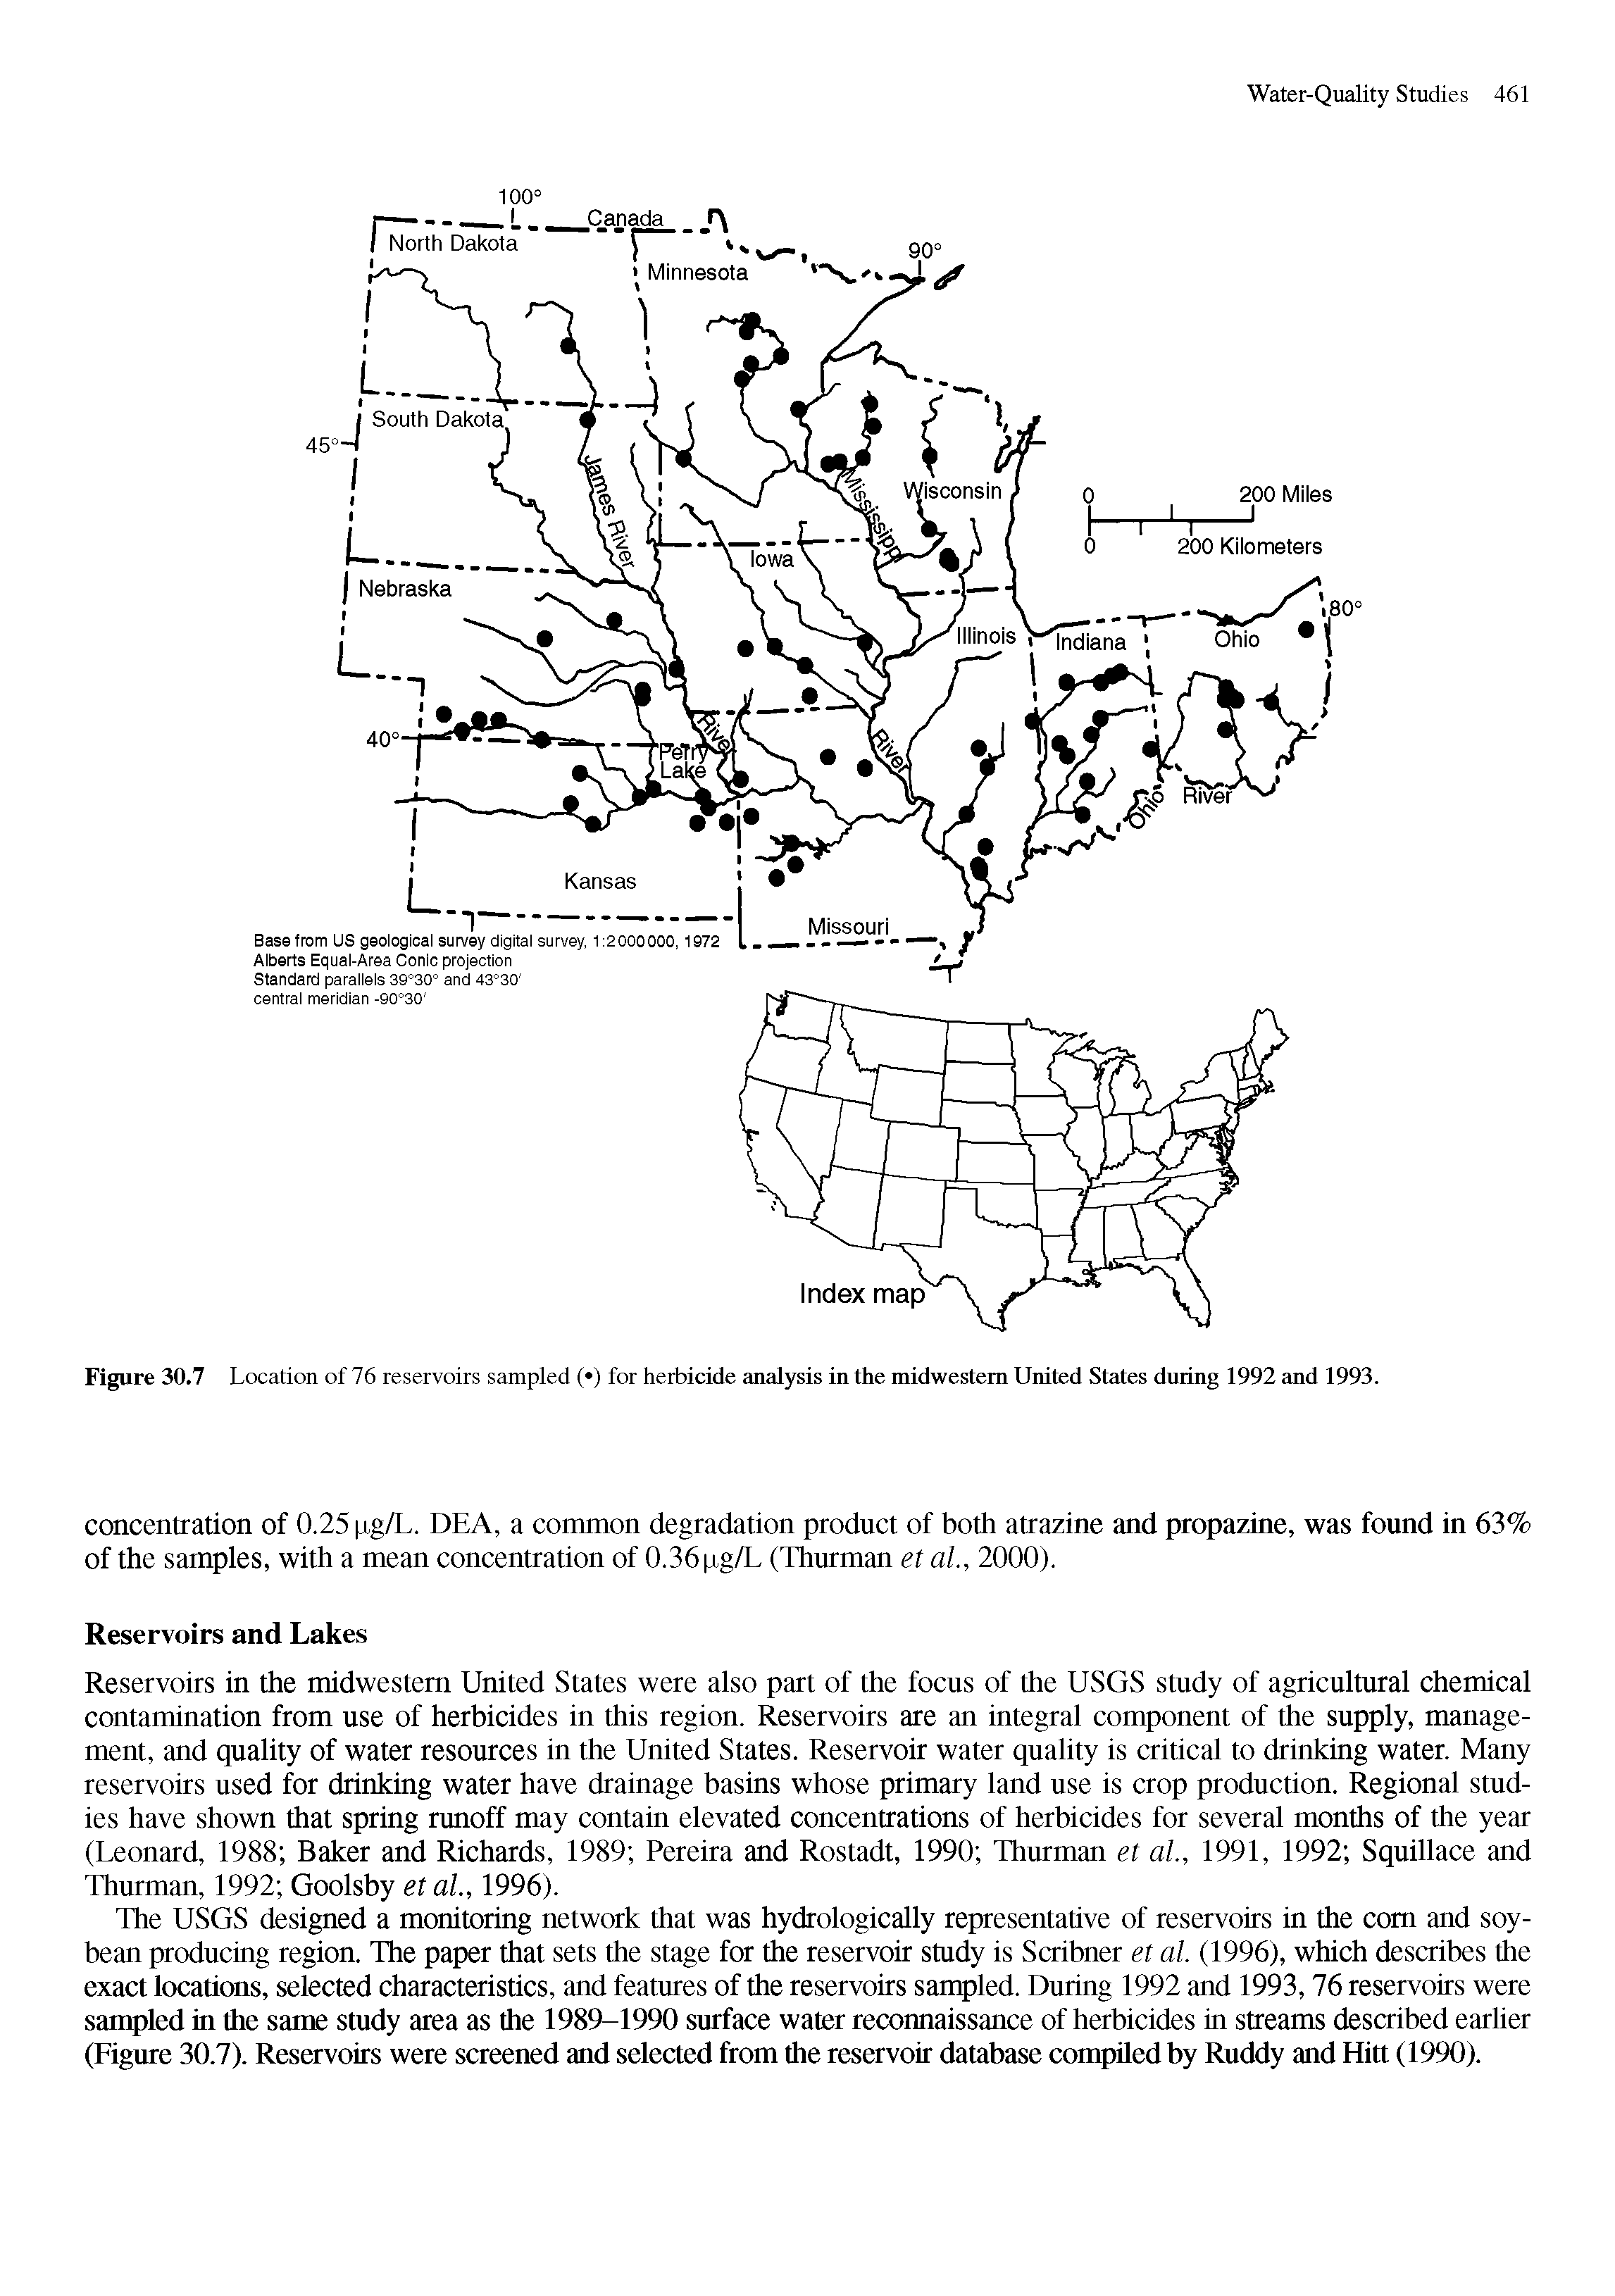 Figure 30.7 Location of 76 reservoirs sampled ( ) for herbicide analysis in the midwestem United States during 1992 and 1993.